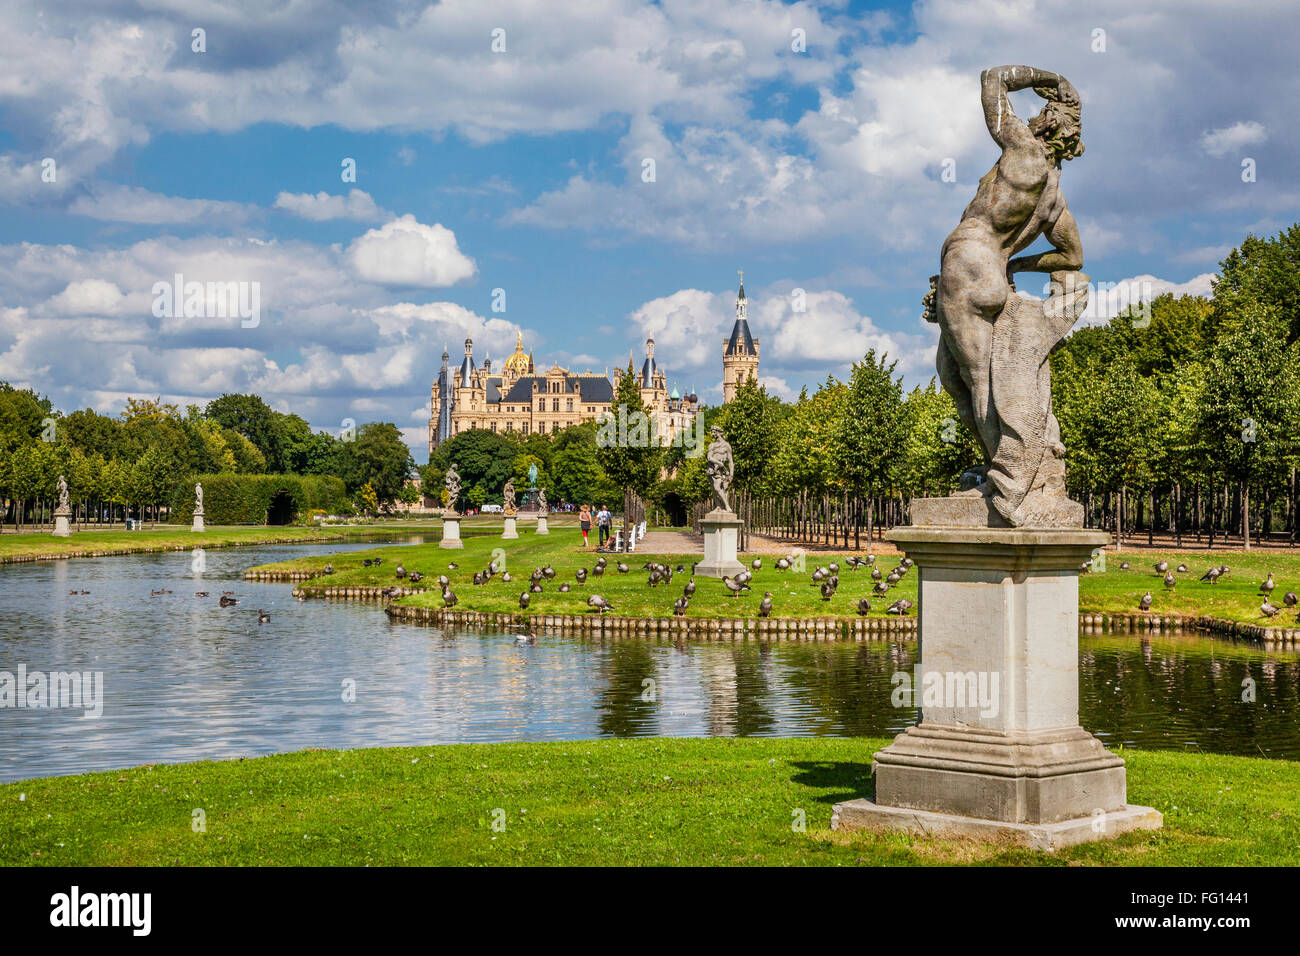 Germany, Mecklenburg-Vorpommern, Schwerin Palace, view of the Palace Gardens with sculptures by Baltasar Permoser (1675 - 1713) Stock Photo